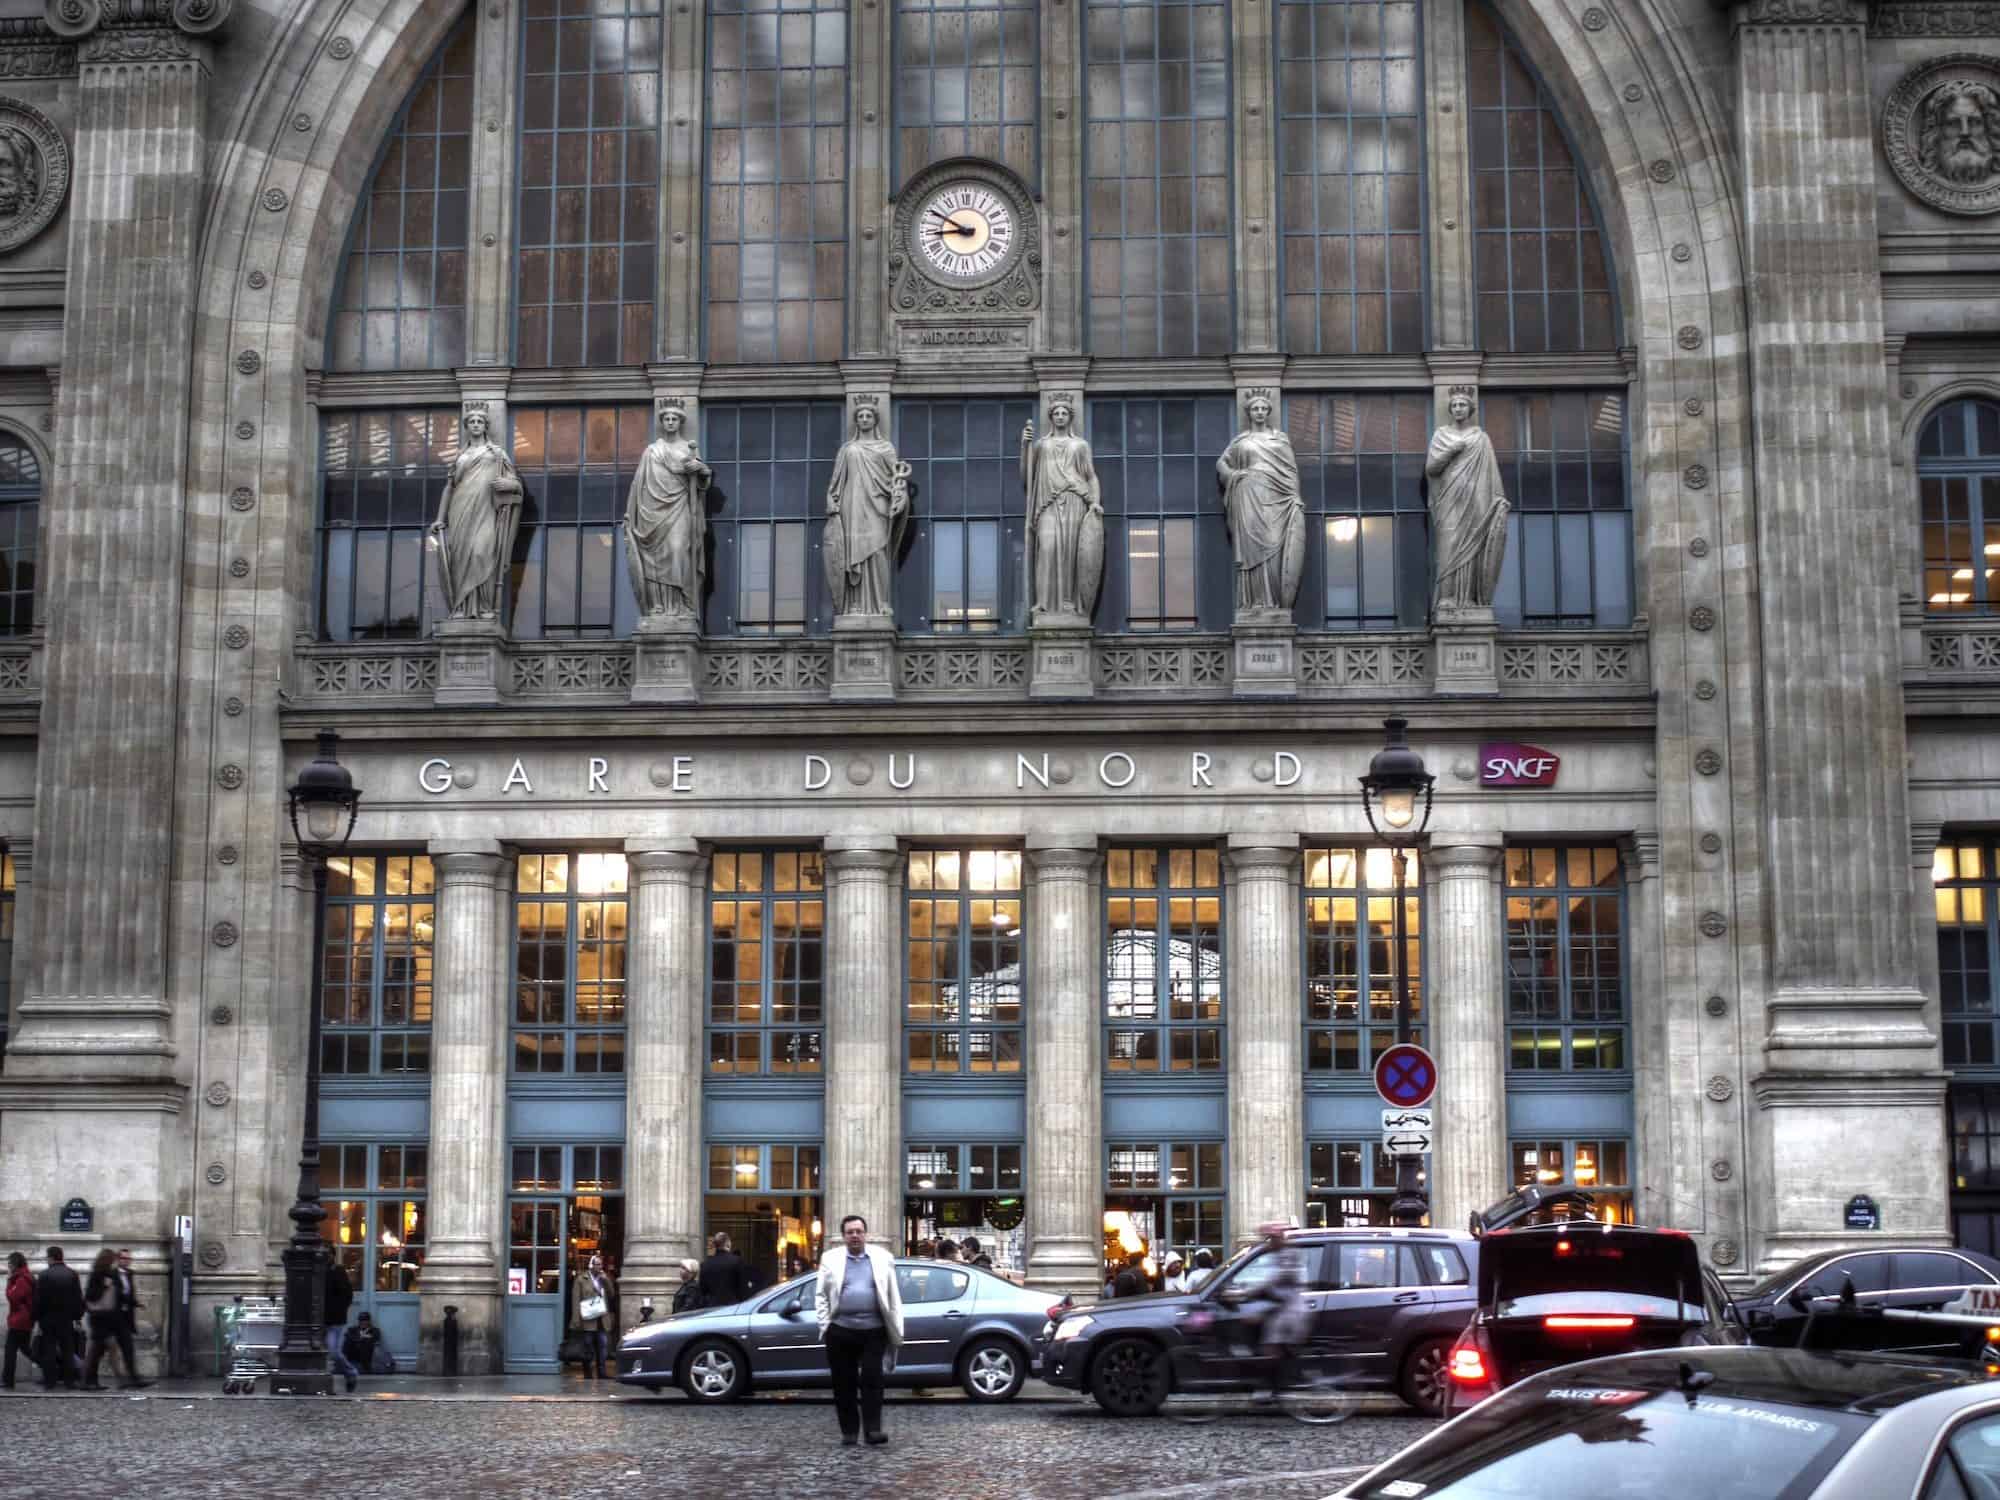 The beautiful statues lined up above the Gare du Nord's main entrance in Paris on a grey rainy day with a taxi driver standing in the foreground. 